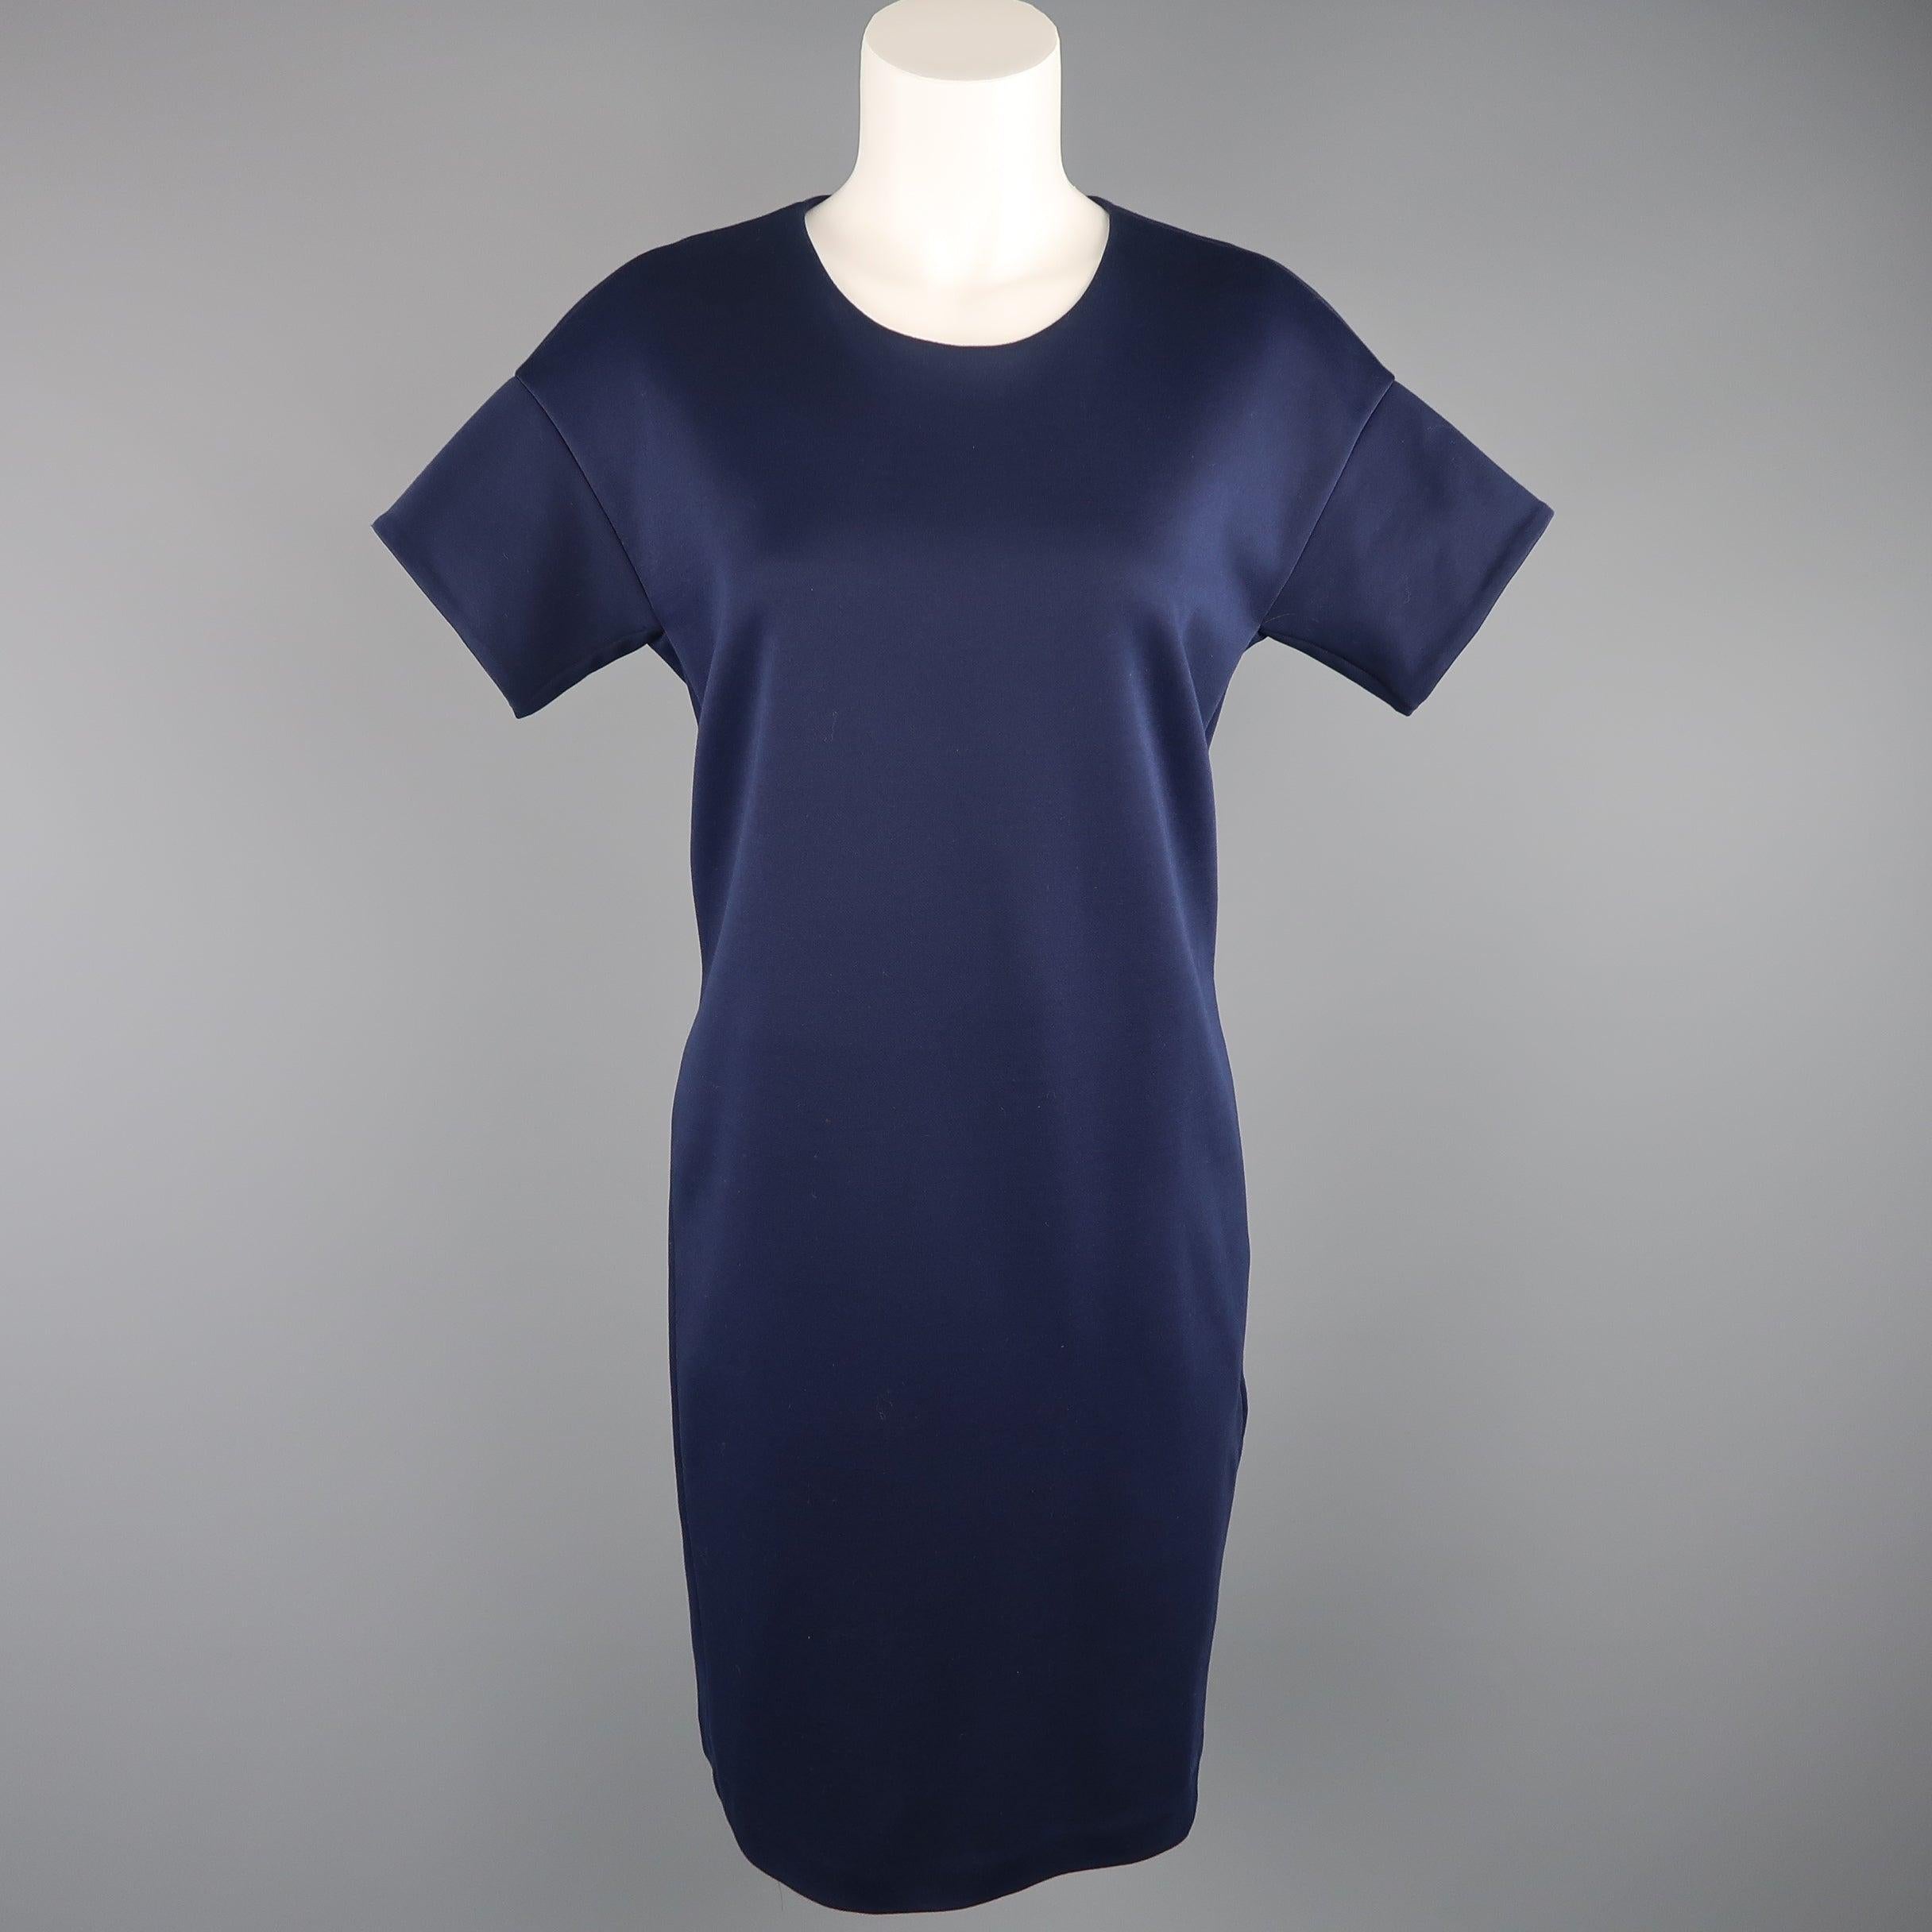 JIL SANDER shift dress comes in a structured jersey material with a round neck, short drop shoulder sleeves, sack silhouette and fabric belt. Made in Italy.Excellent Pre-Owned Condition. 

Marked:   (no size) 

Measurements: 
 
Shoulder: 20 inches